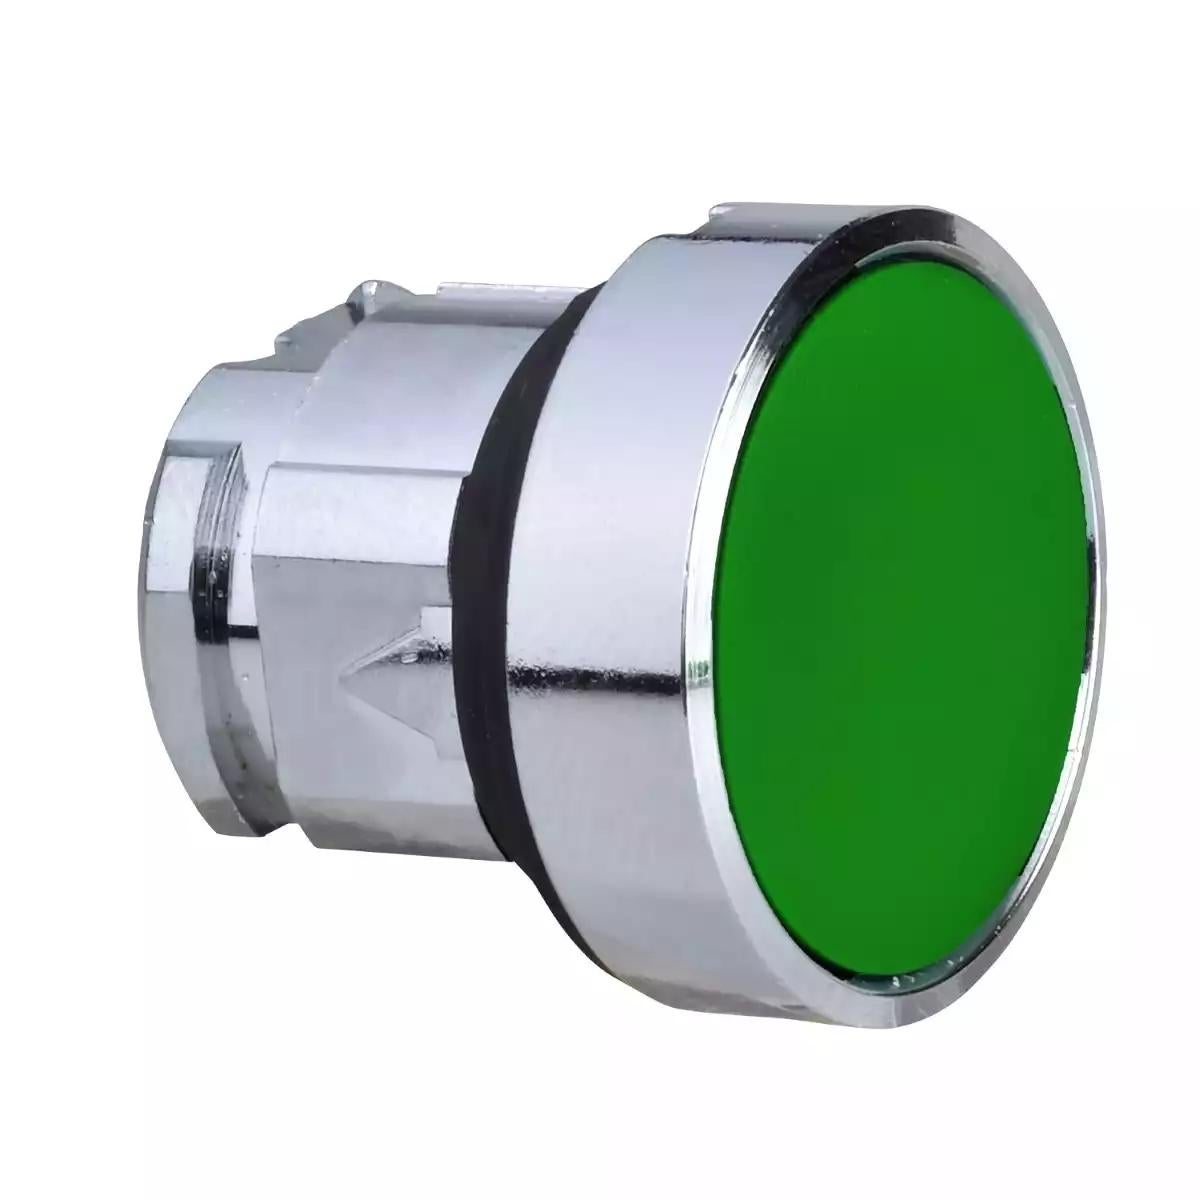 Head for non illuminated push button, Harmony XB4, metal, green flush, 22mm, spring return, clear boot, unmarked